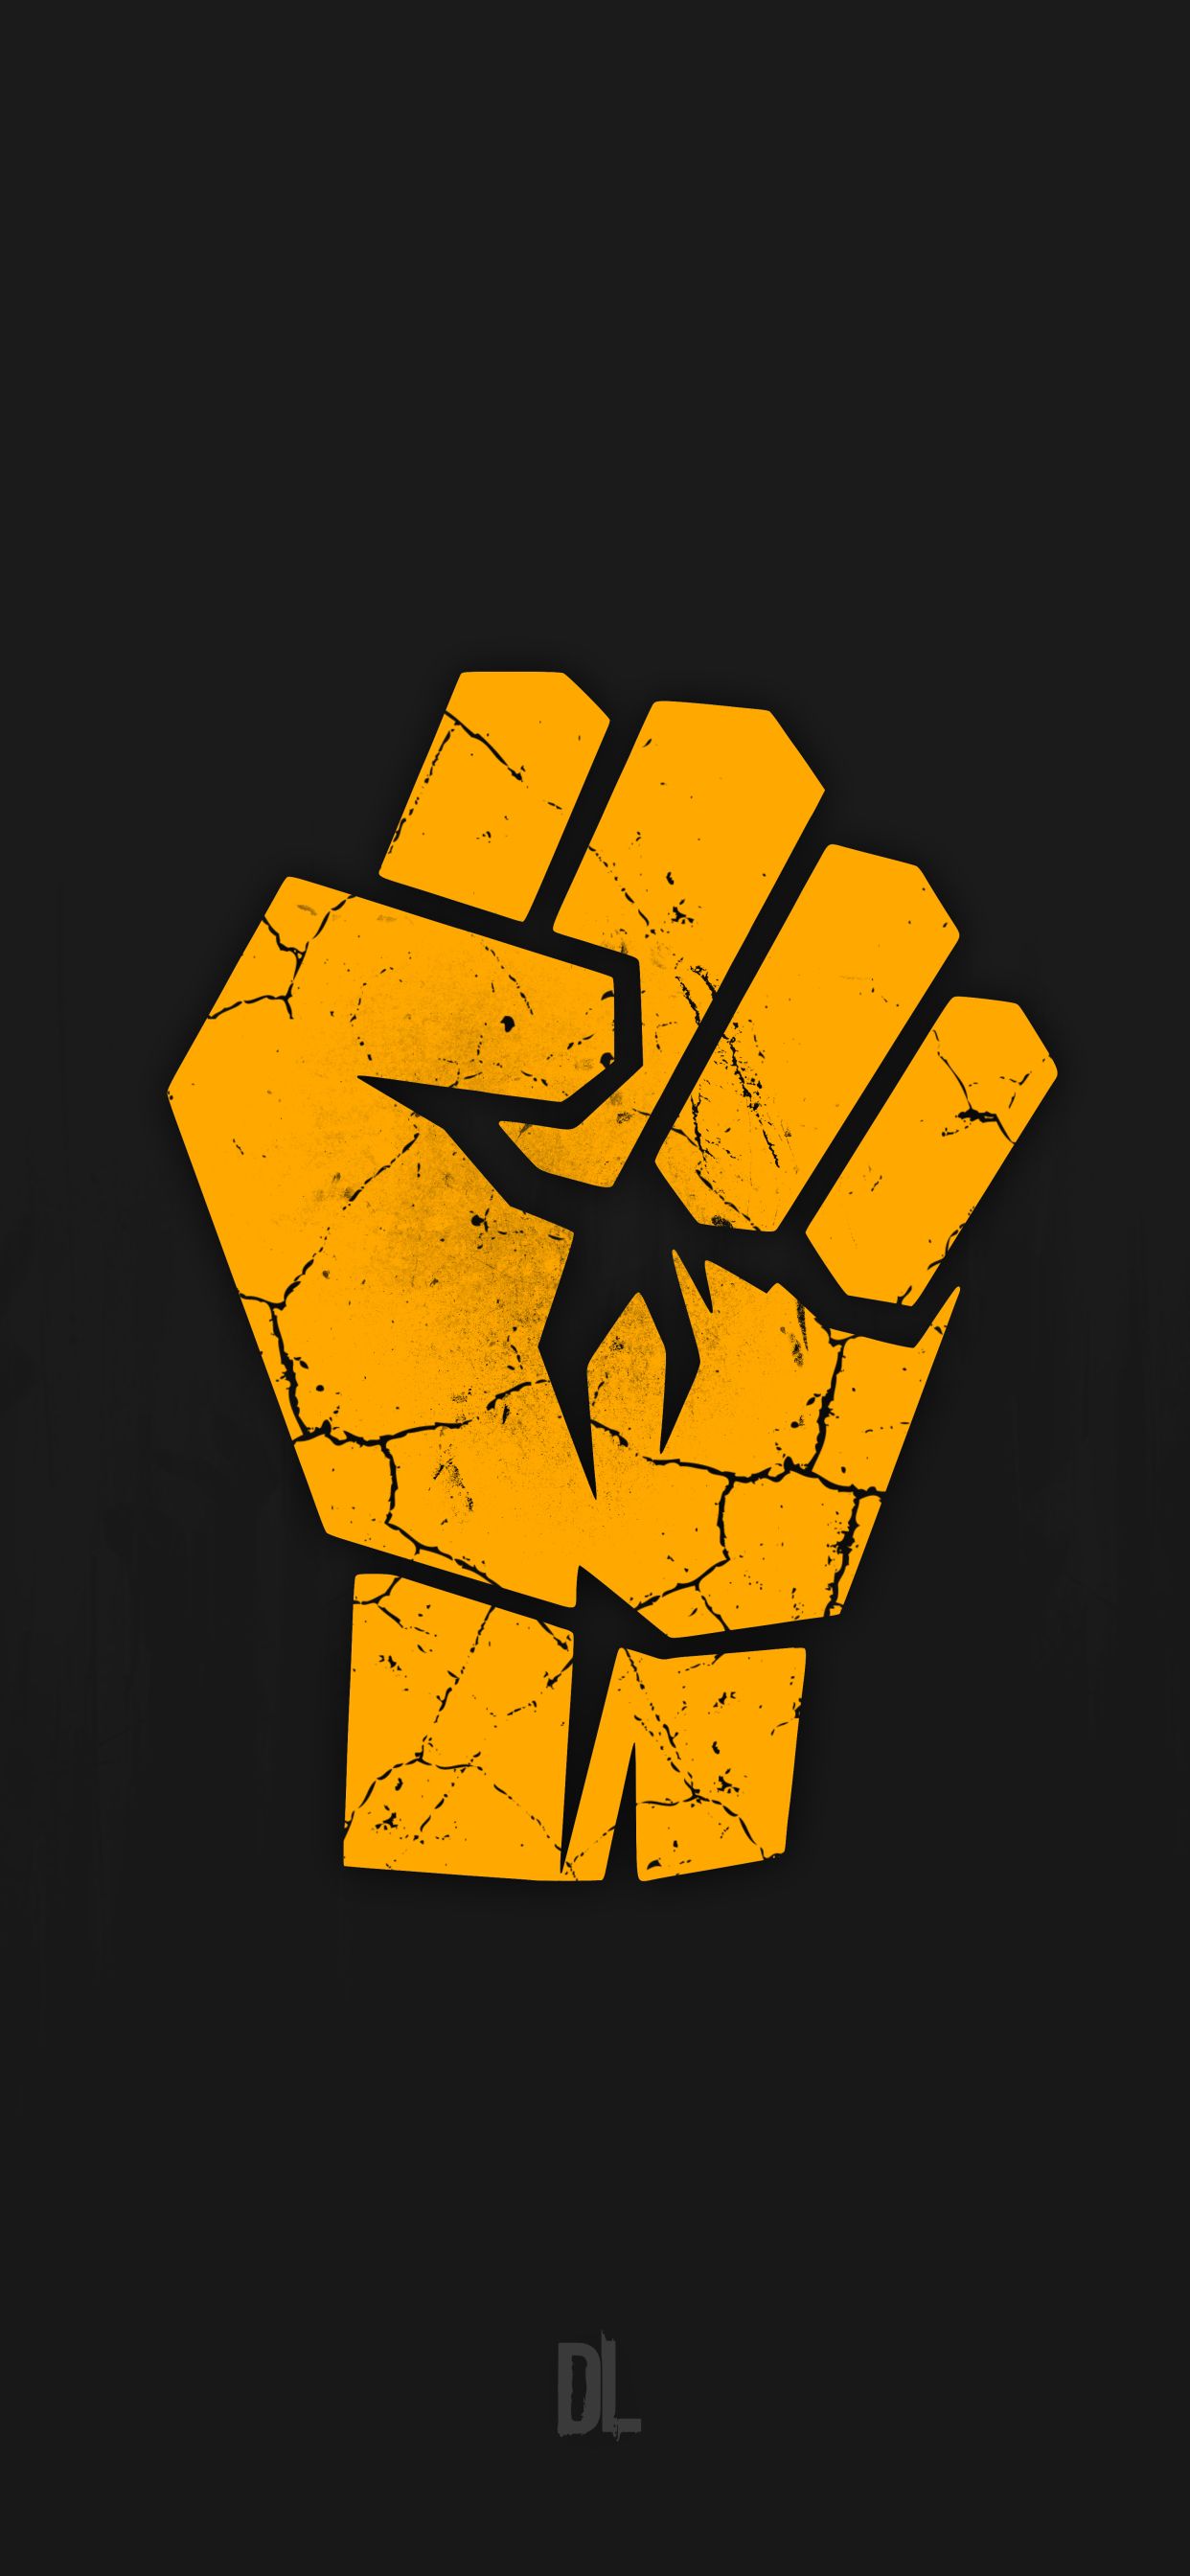 Dying Light Video Game Minimalist Icon iPhone XS MAX Wallpaper, HD Games 4K Wallpaper, Image, Photo and Background